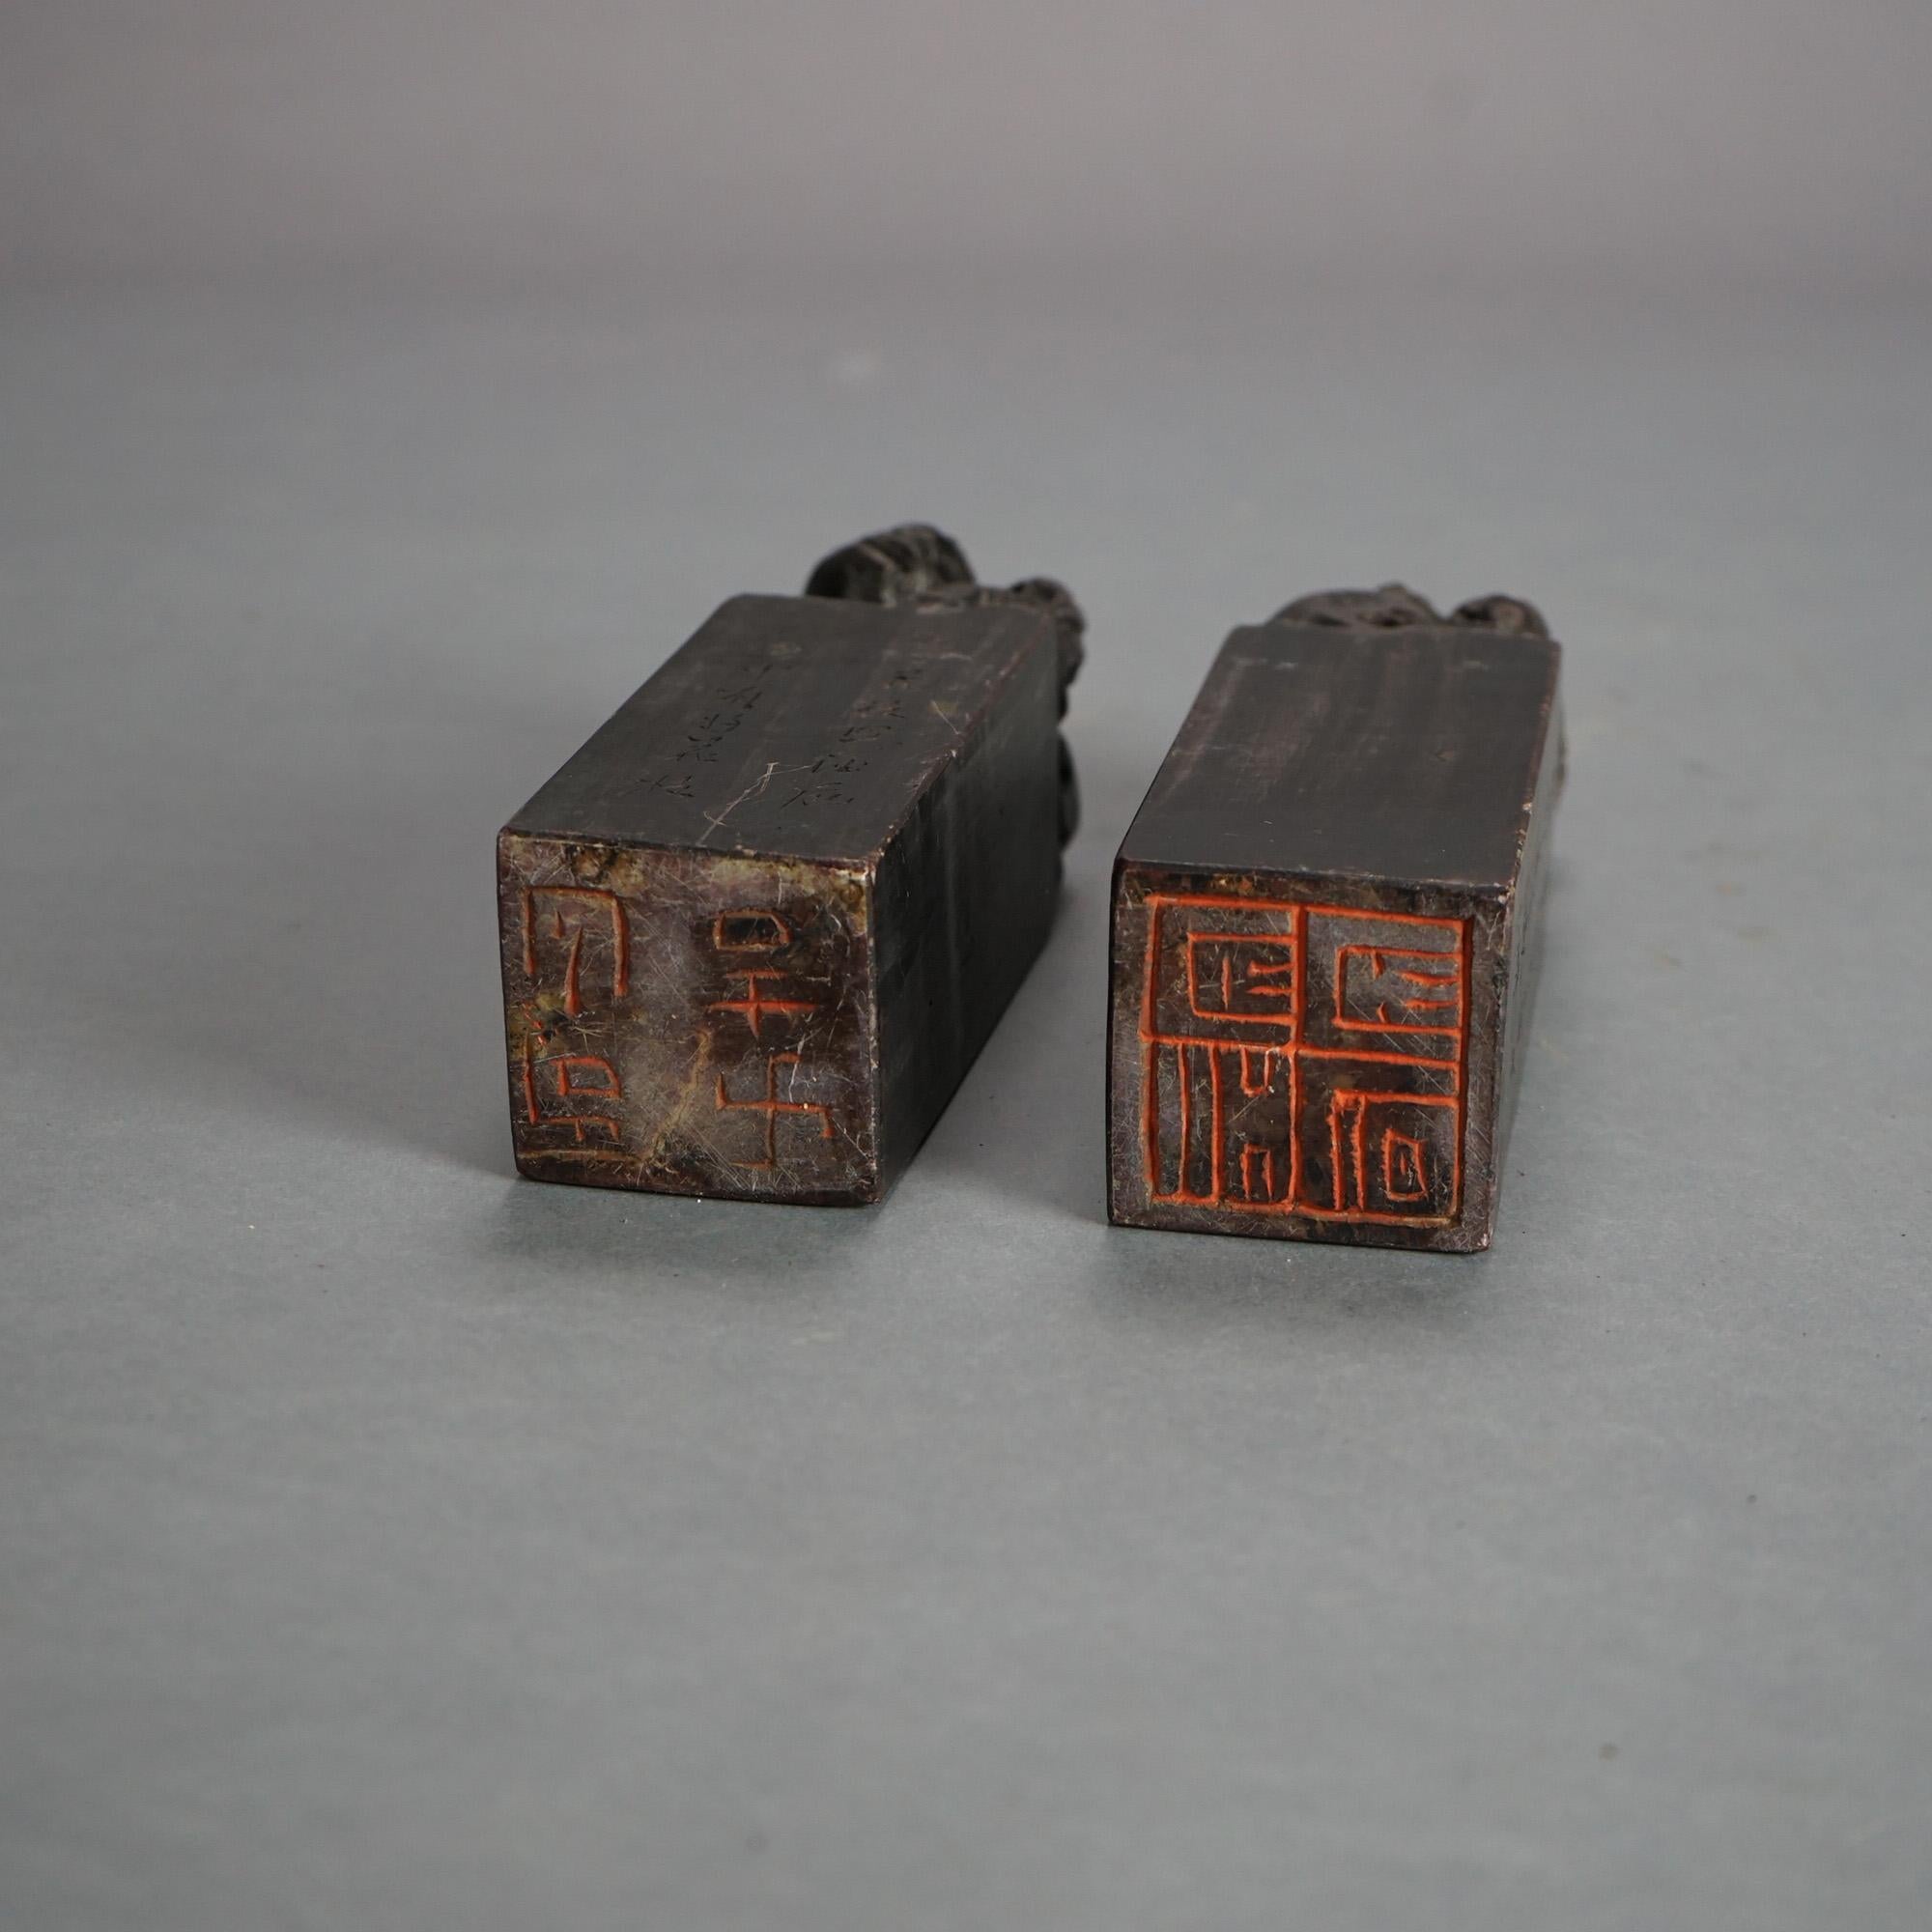 Antique Pair of Chinese Hardstone Figural Foo Dog Ink Stamps C1930

Measures - 7.5